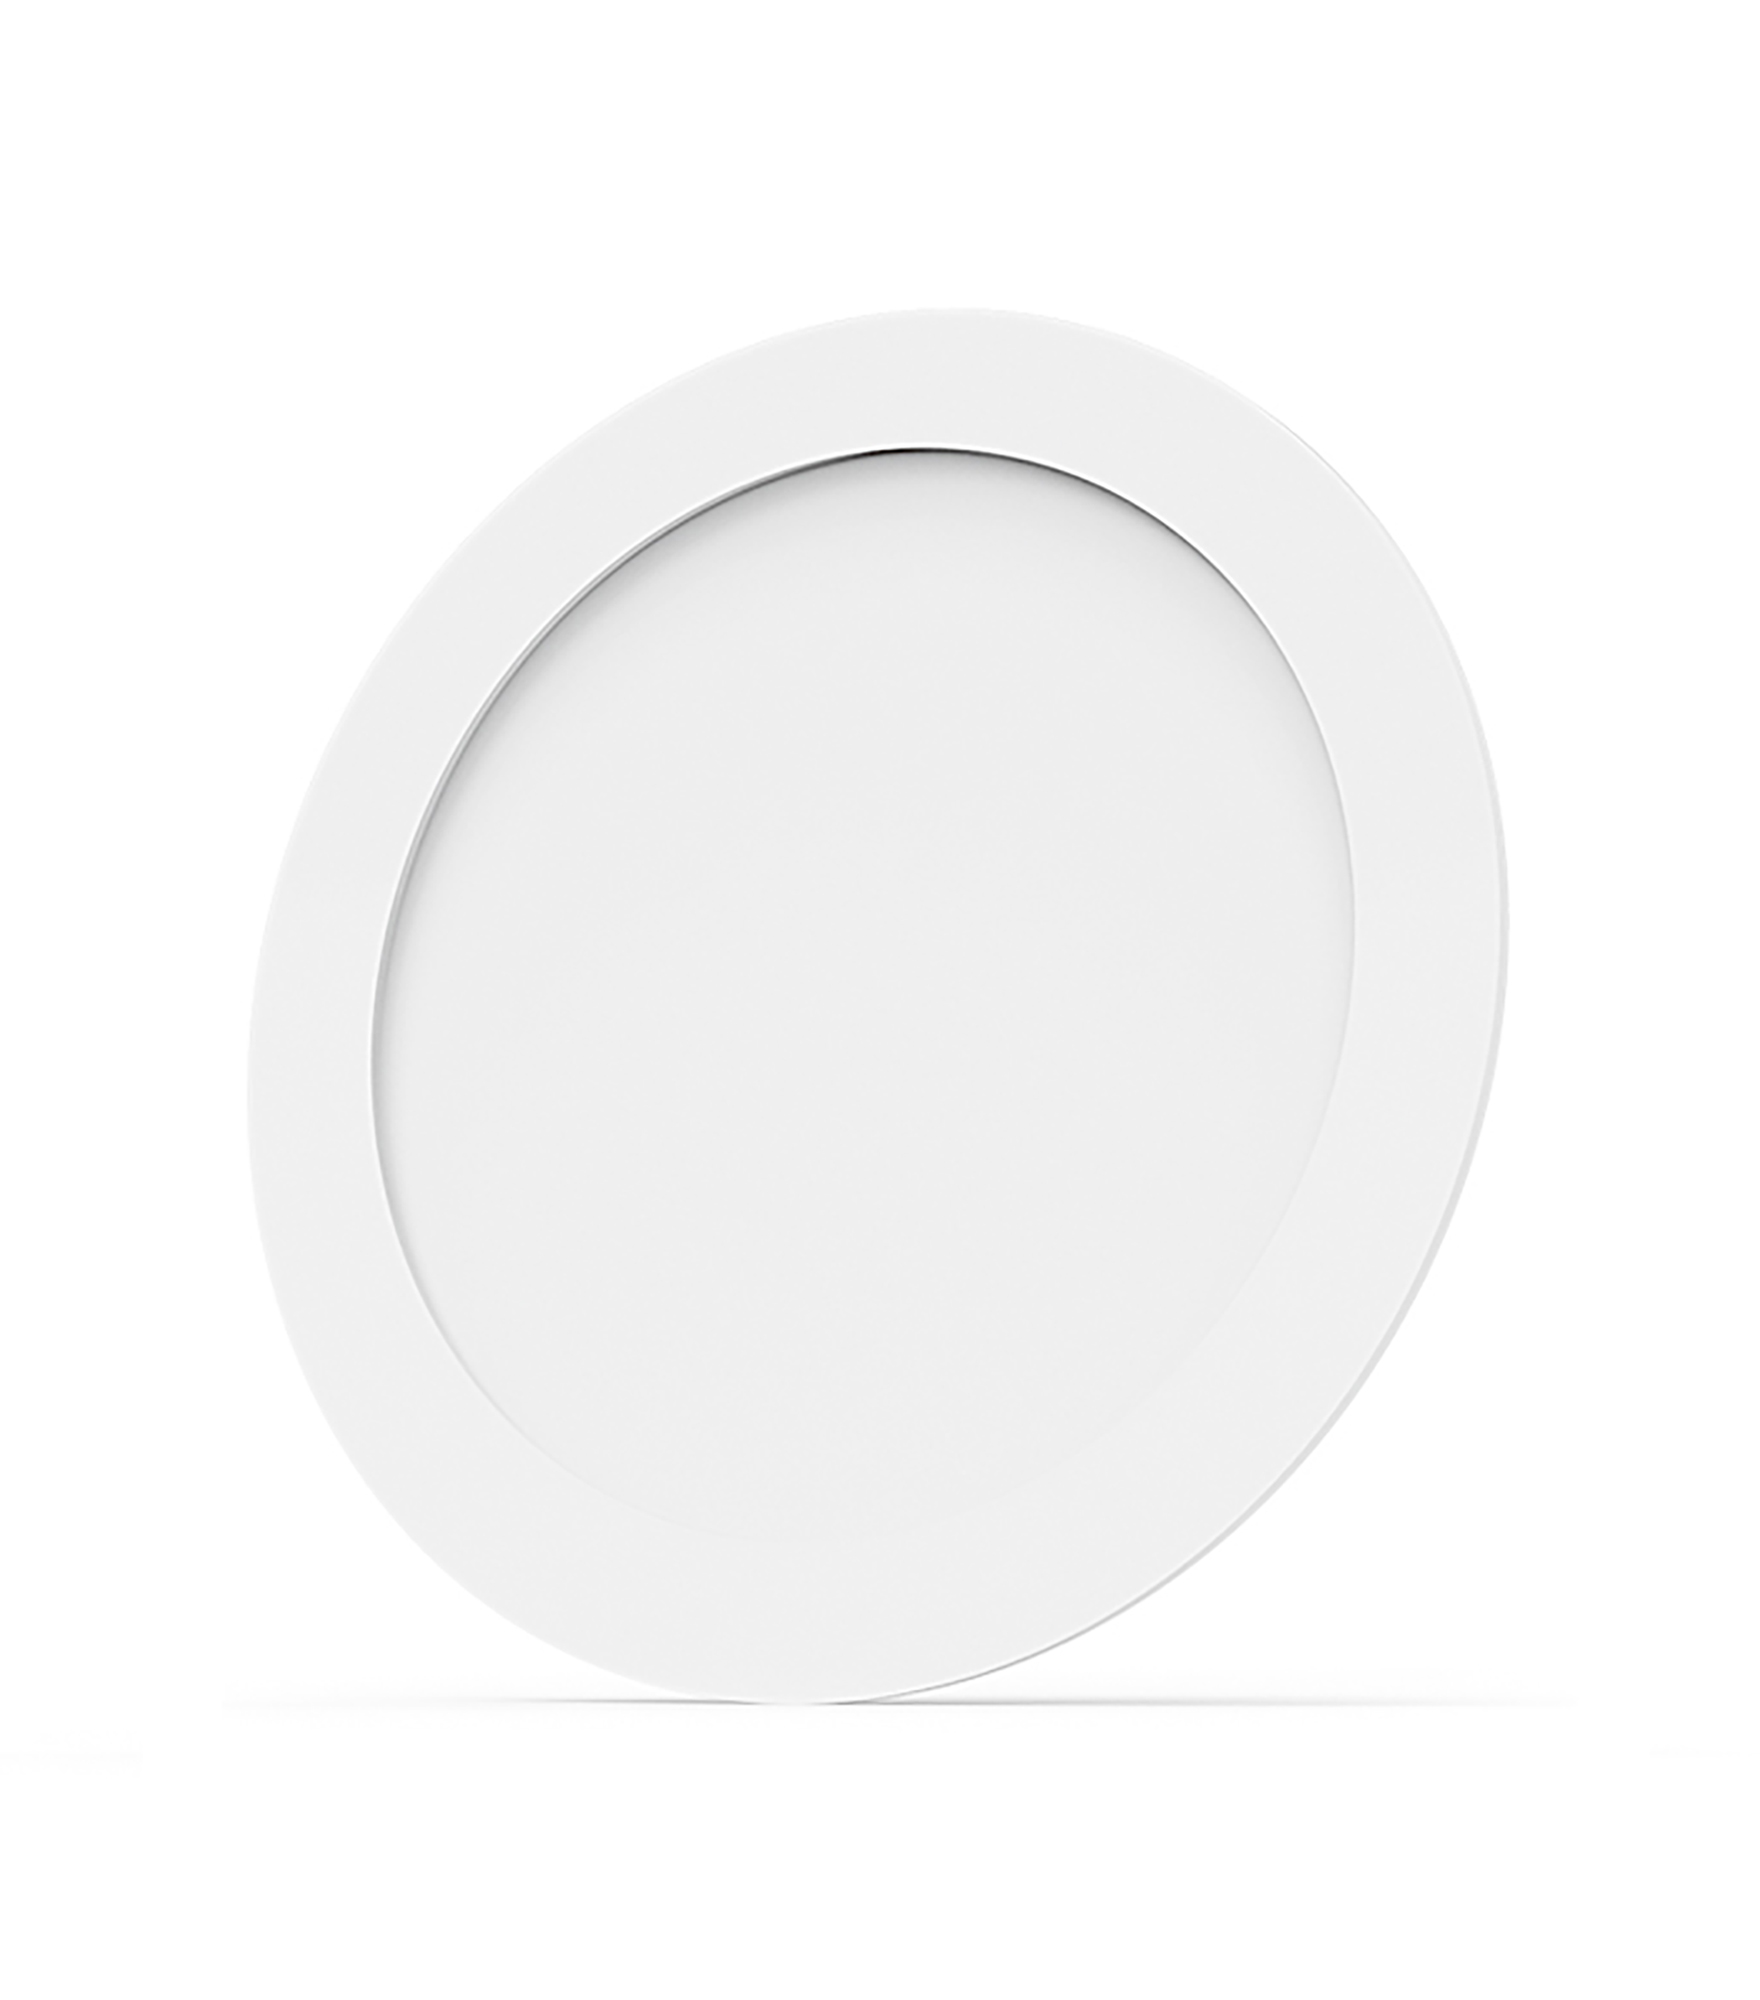 Intego R Supervision Recessed Ceiling Luminaires Techtouch Round Recess Ceiling